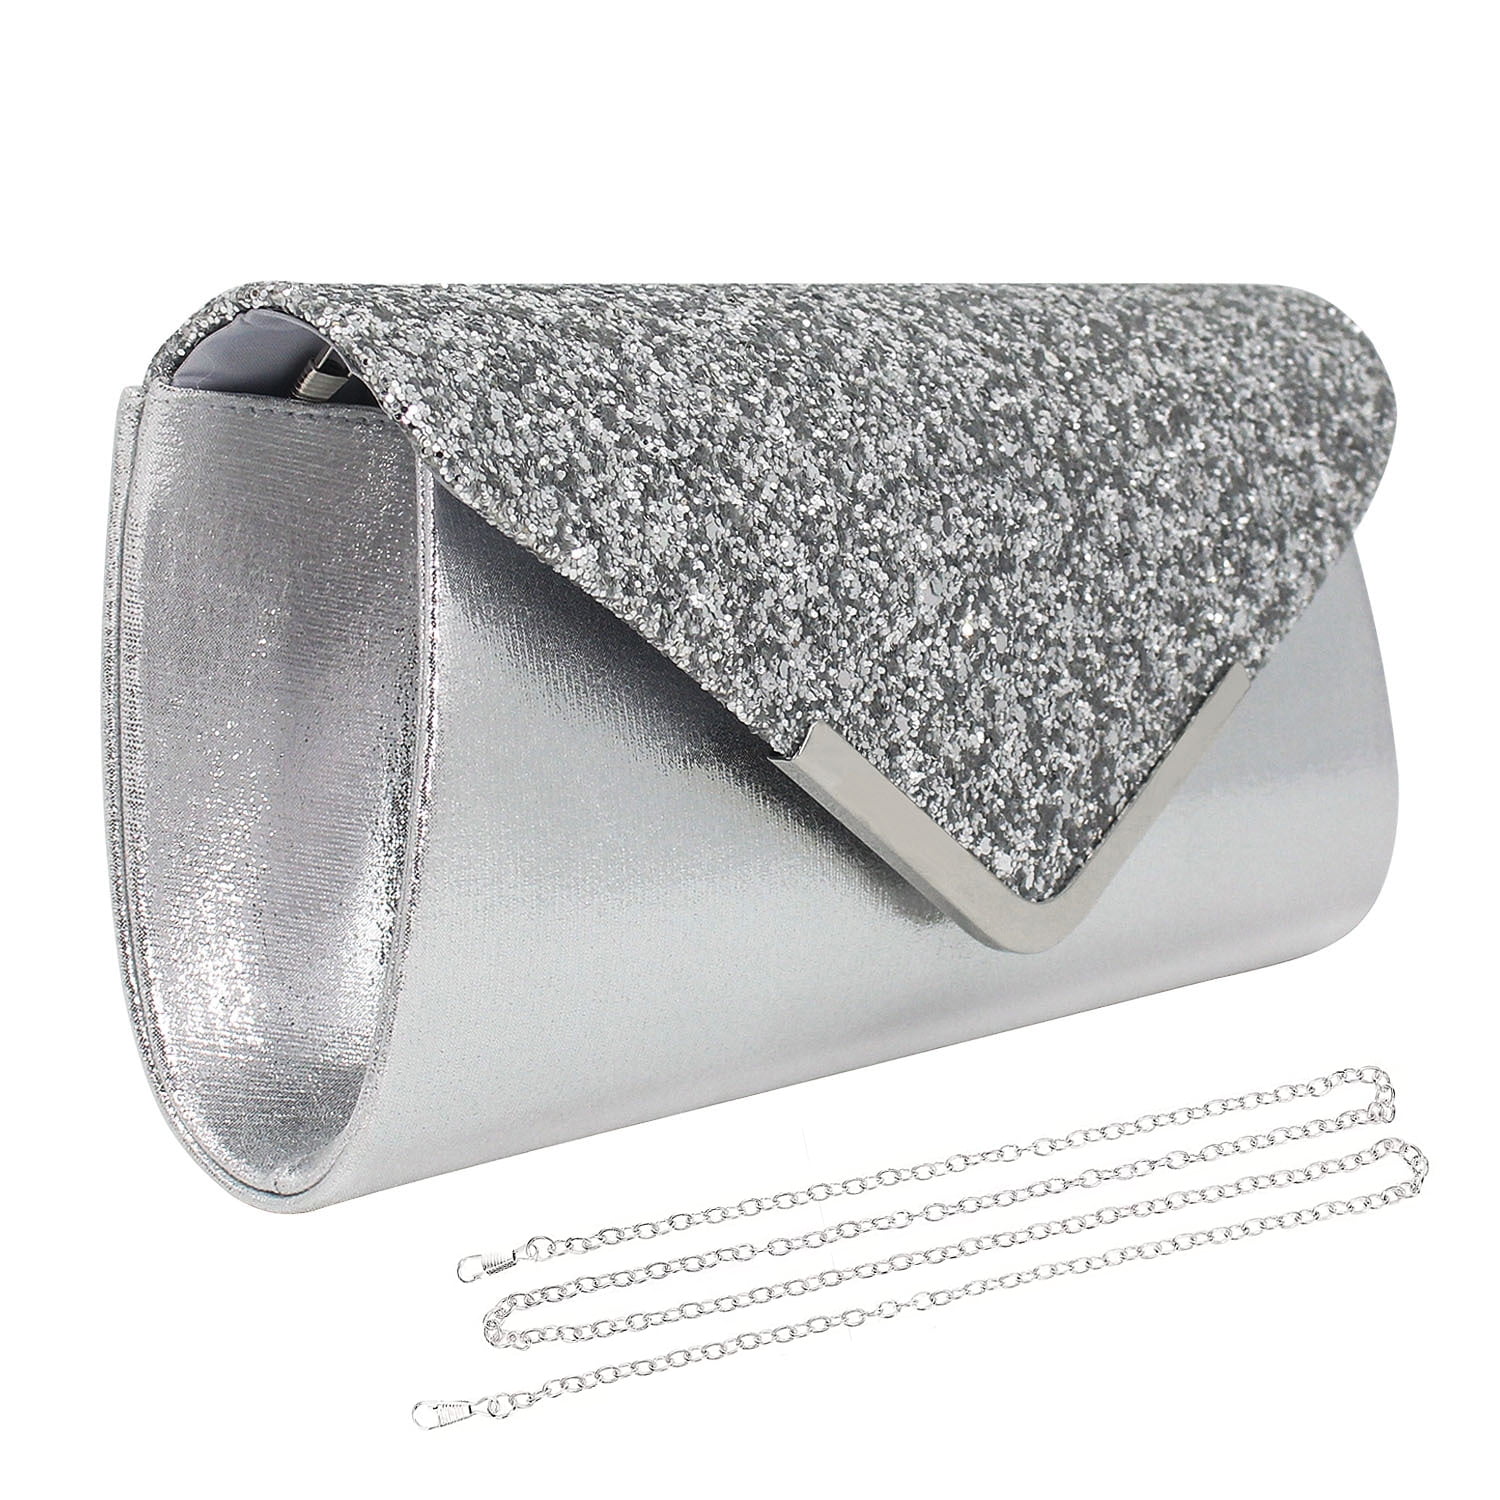 Women Antique Vintage Metal Mosaic Clutch Evening Bag Handcrafted Stone Handbag  Purse Made in India (Silver)